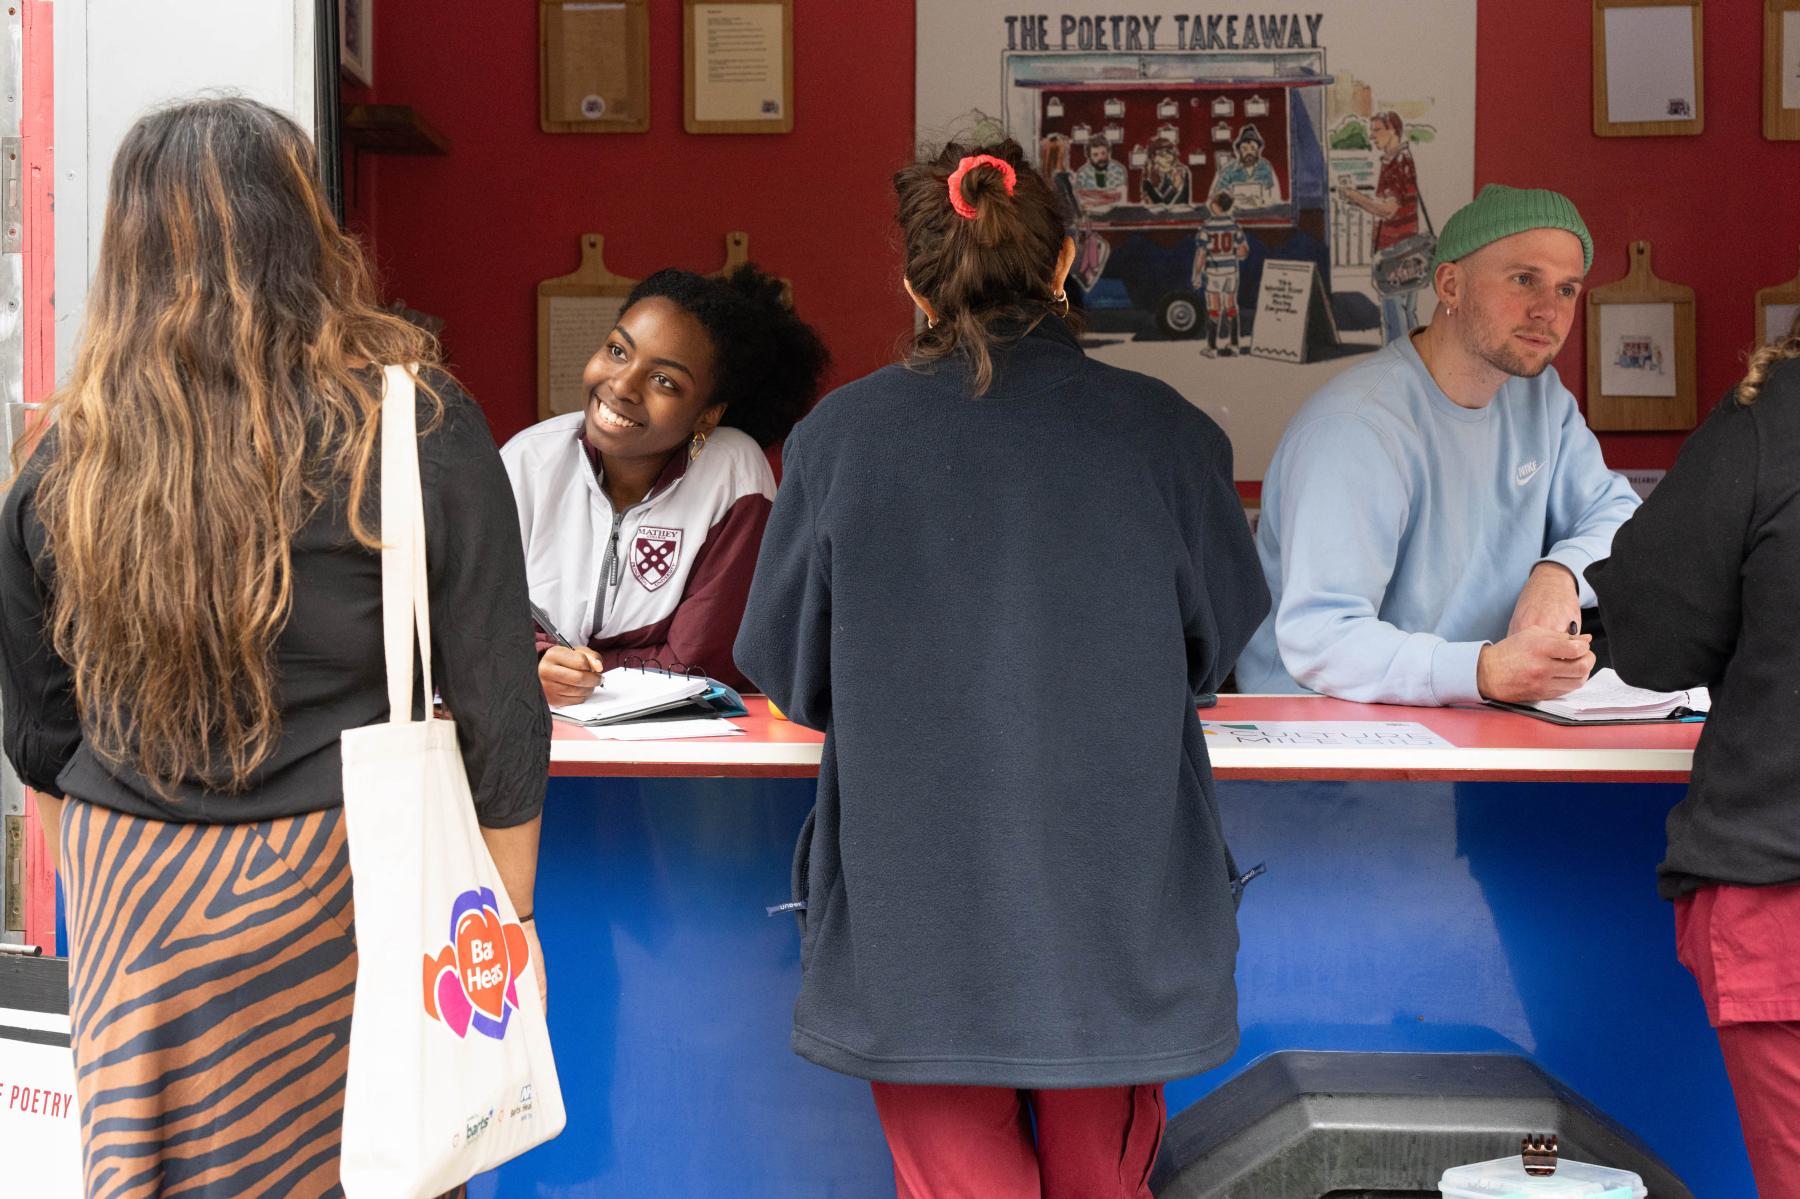 Members of staff visit the poetry takeaway in the square at Barts